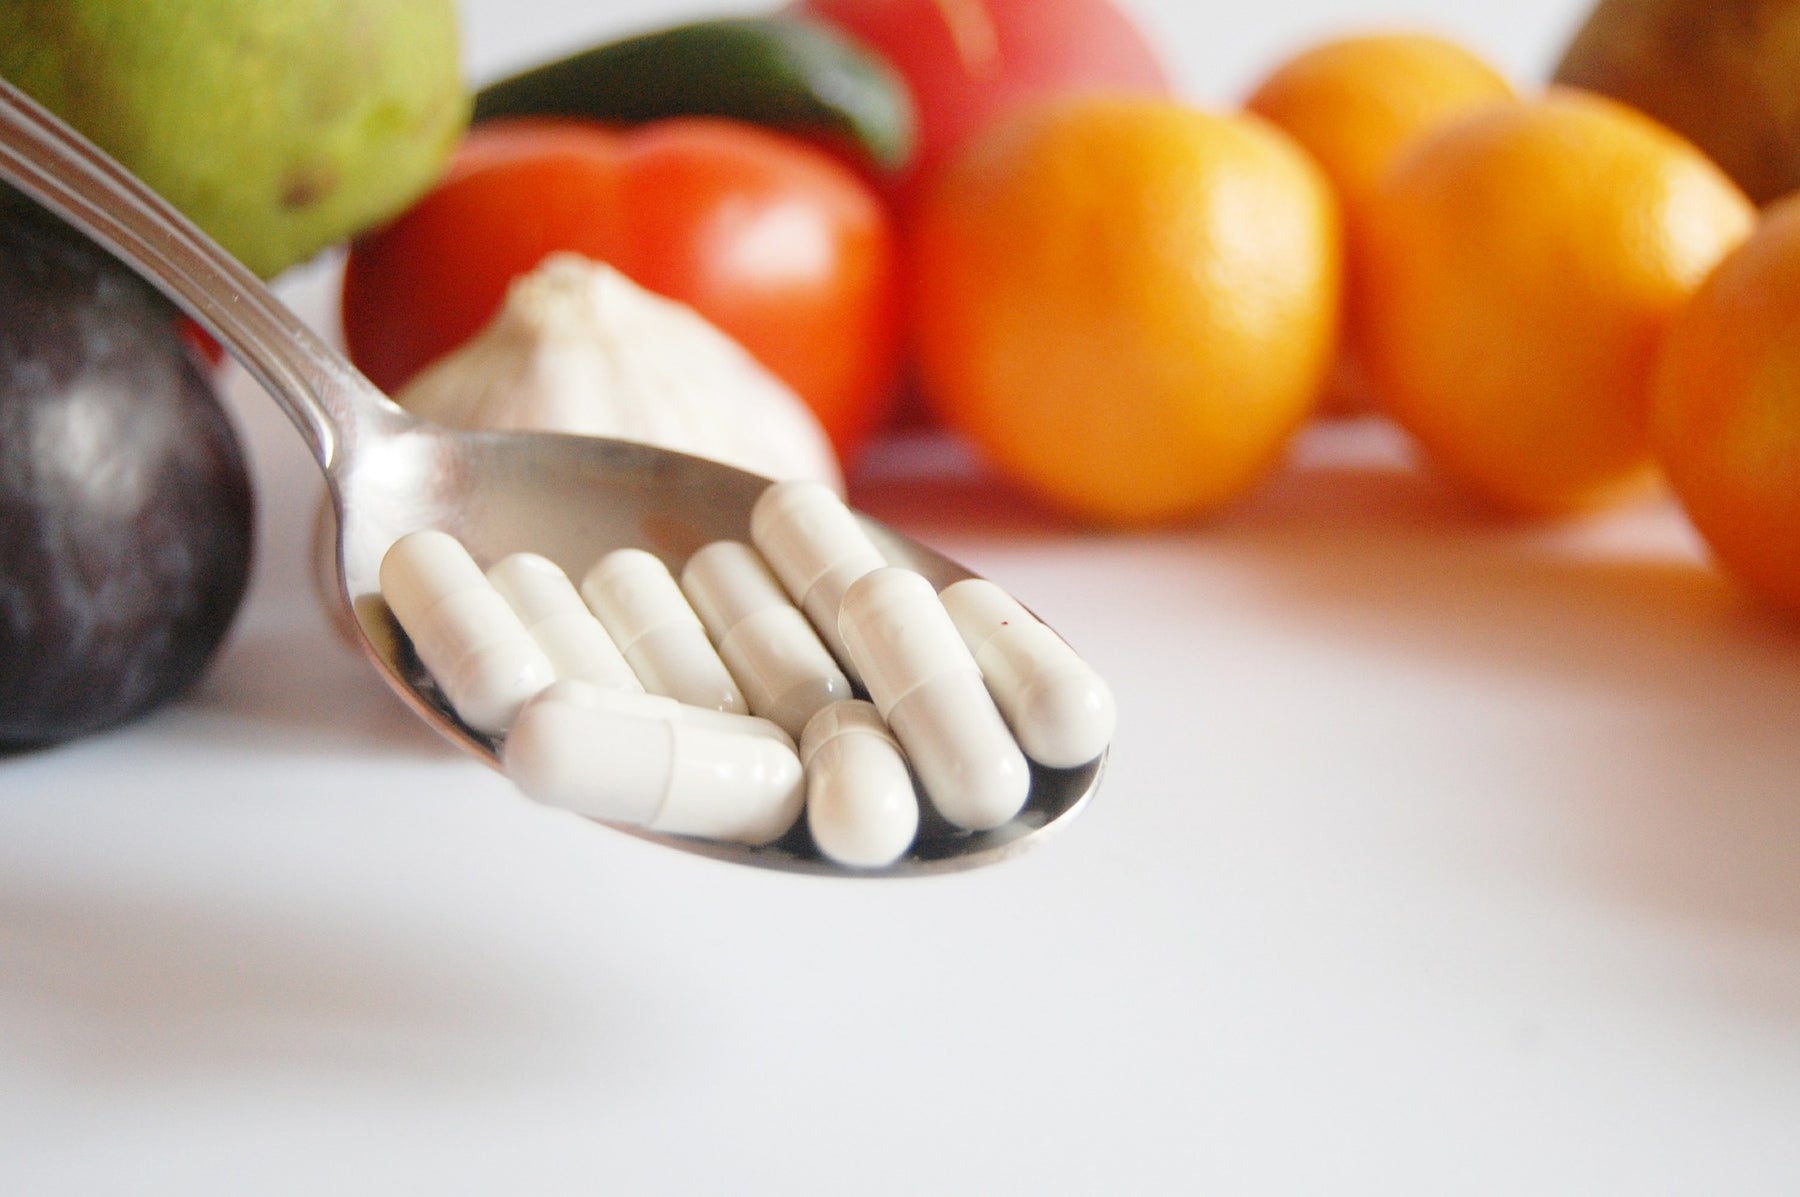 6 Things Everyone Should Know About Supplements